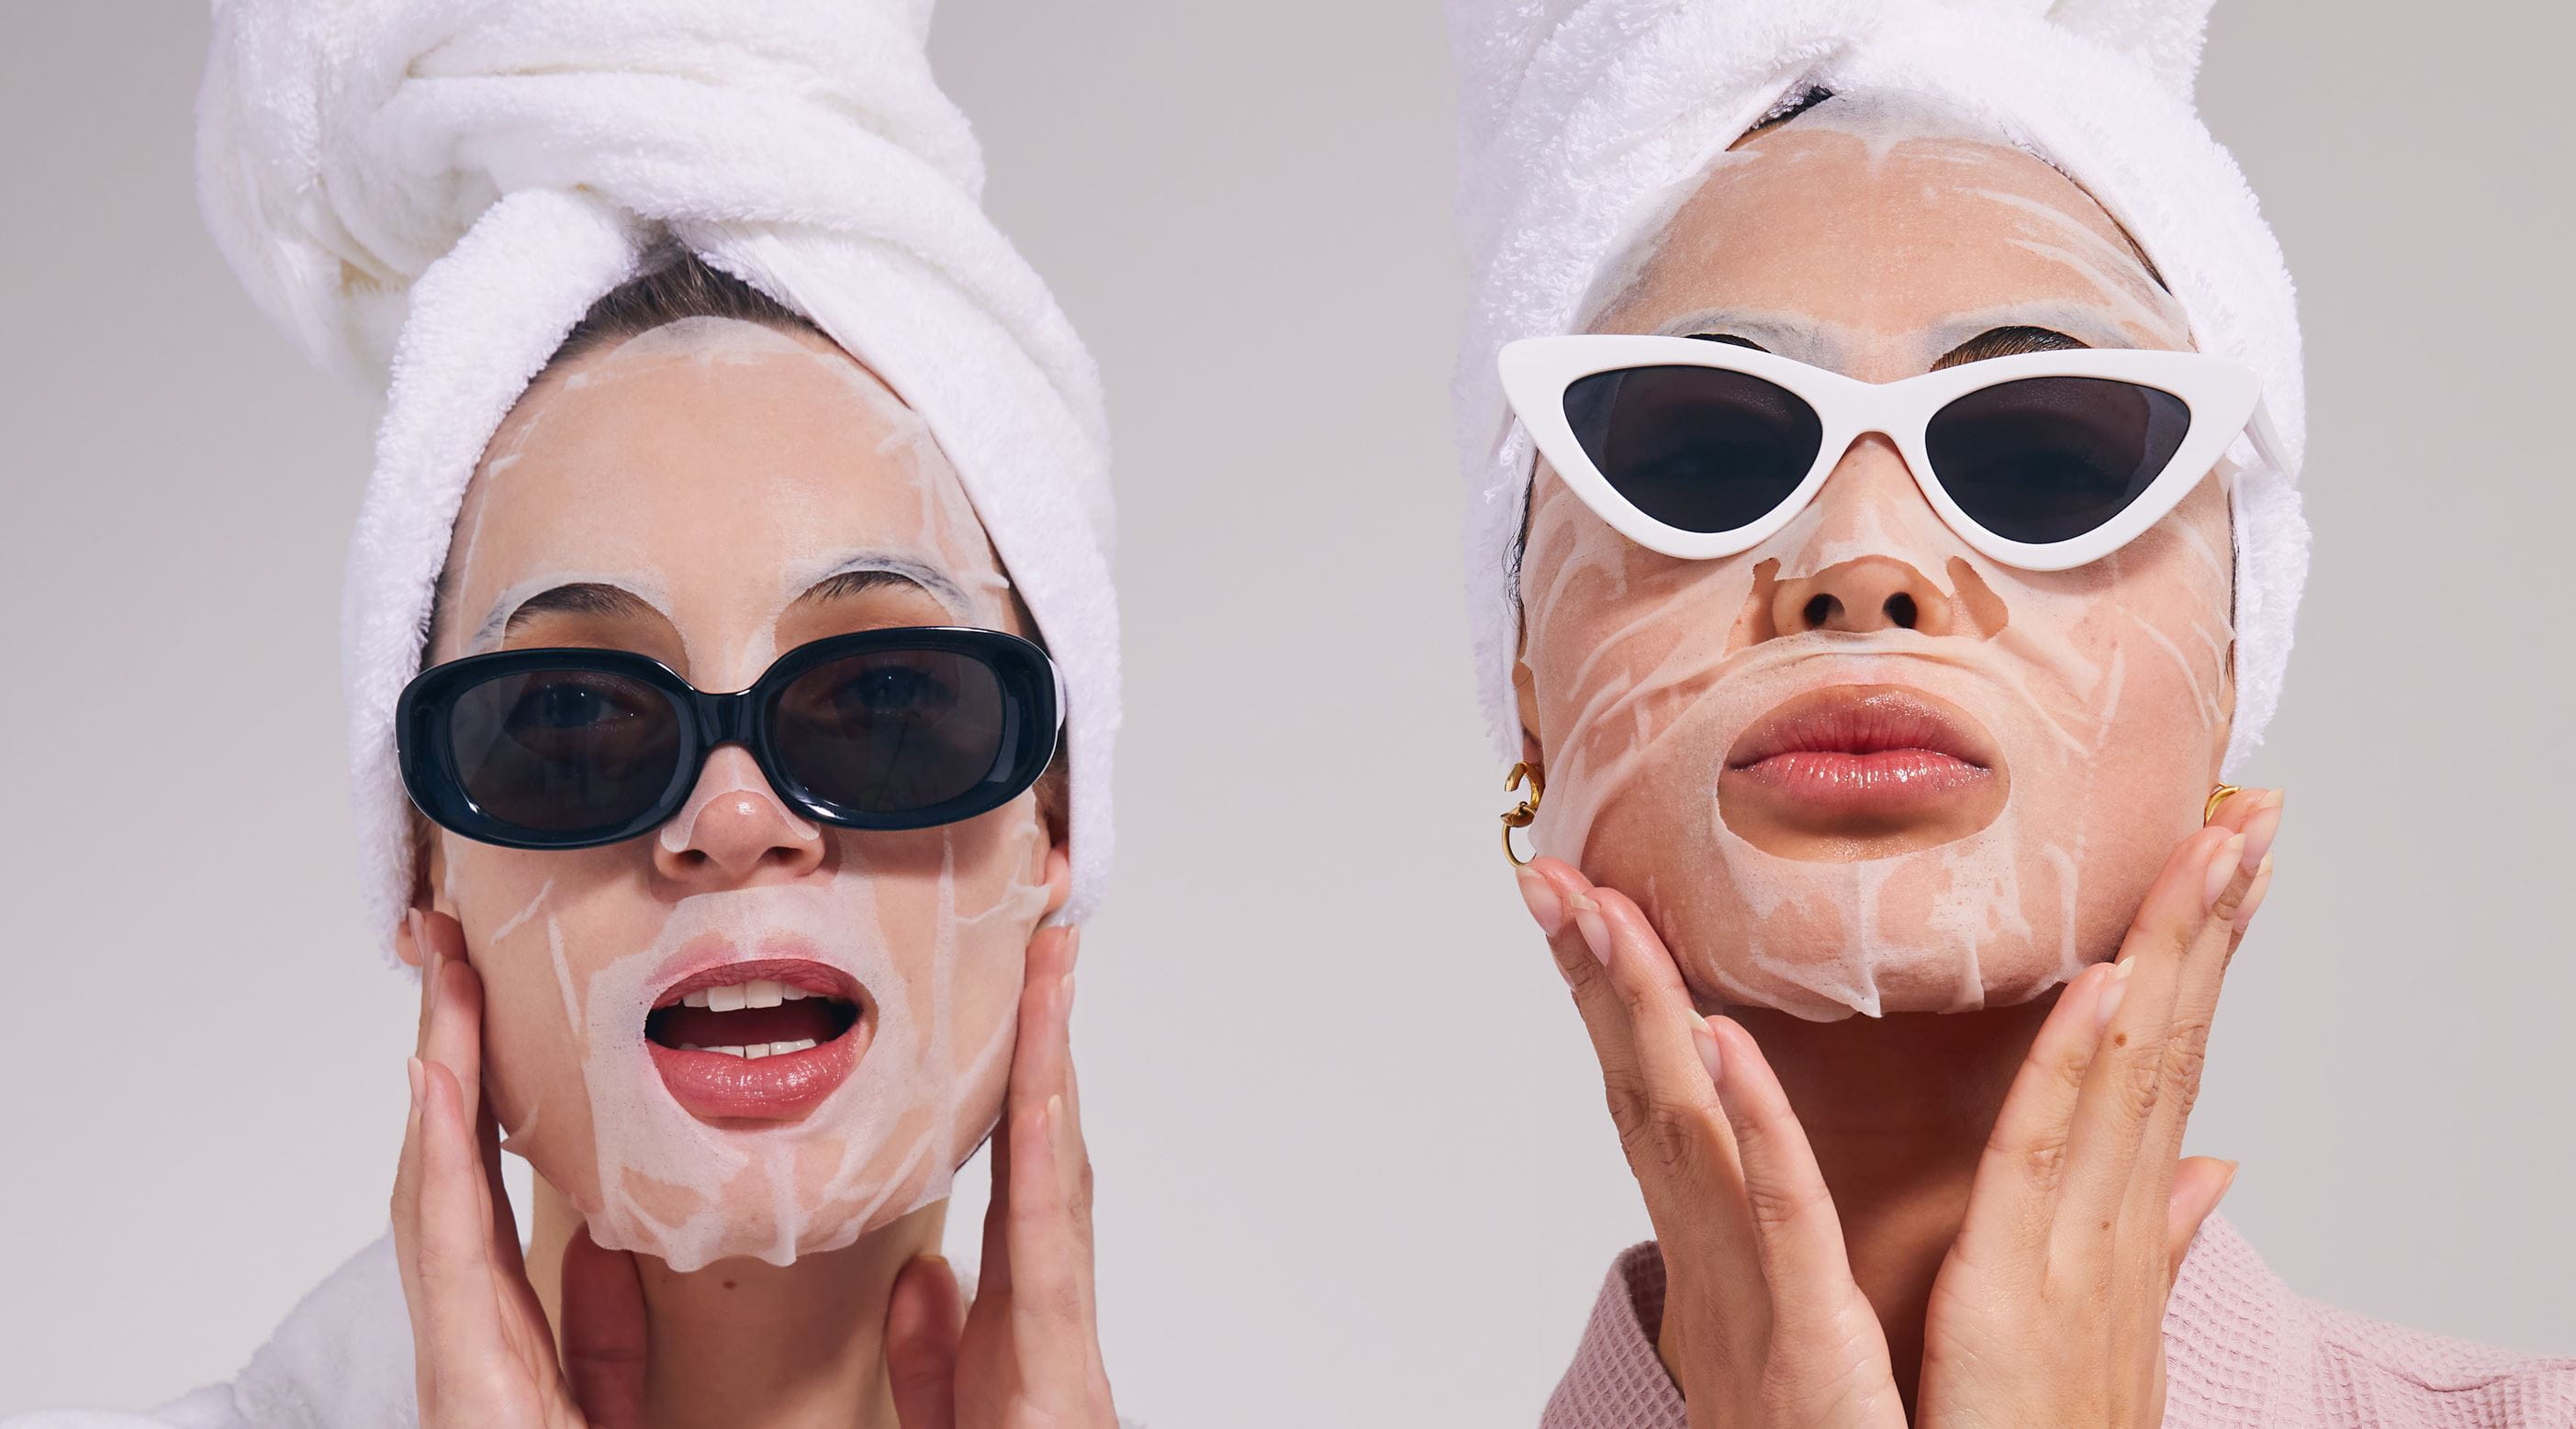 Two girls with sunglasses on and Nivea beauty masks